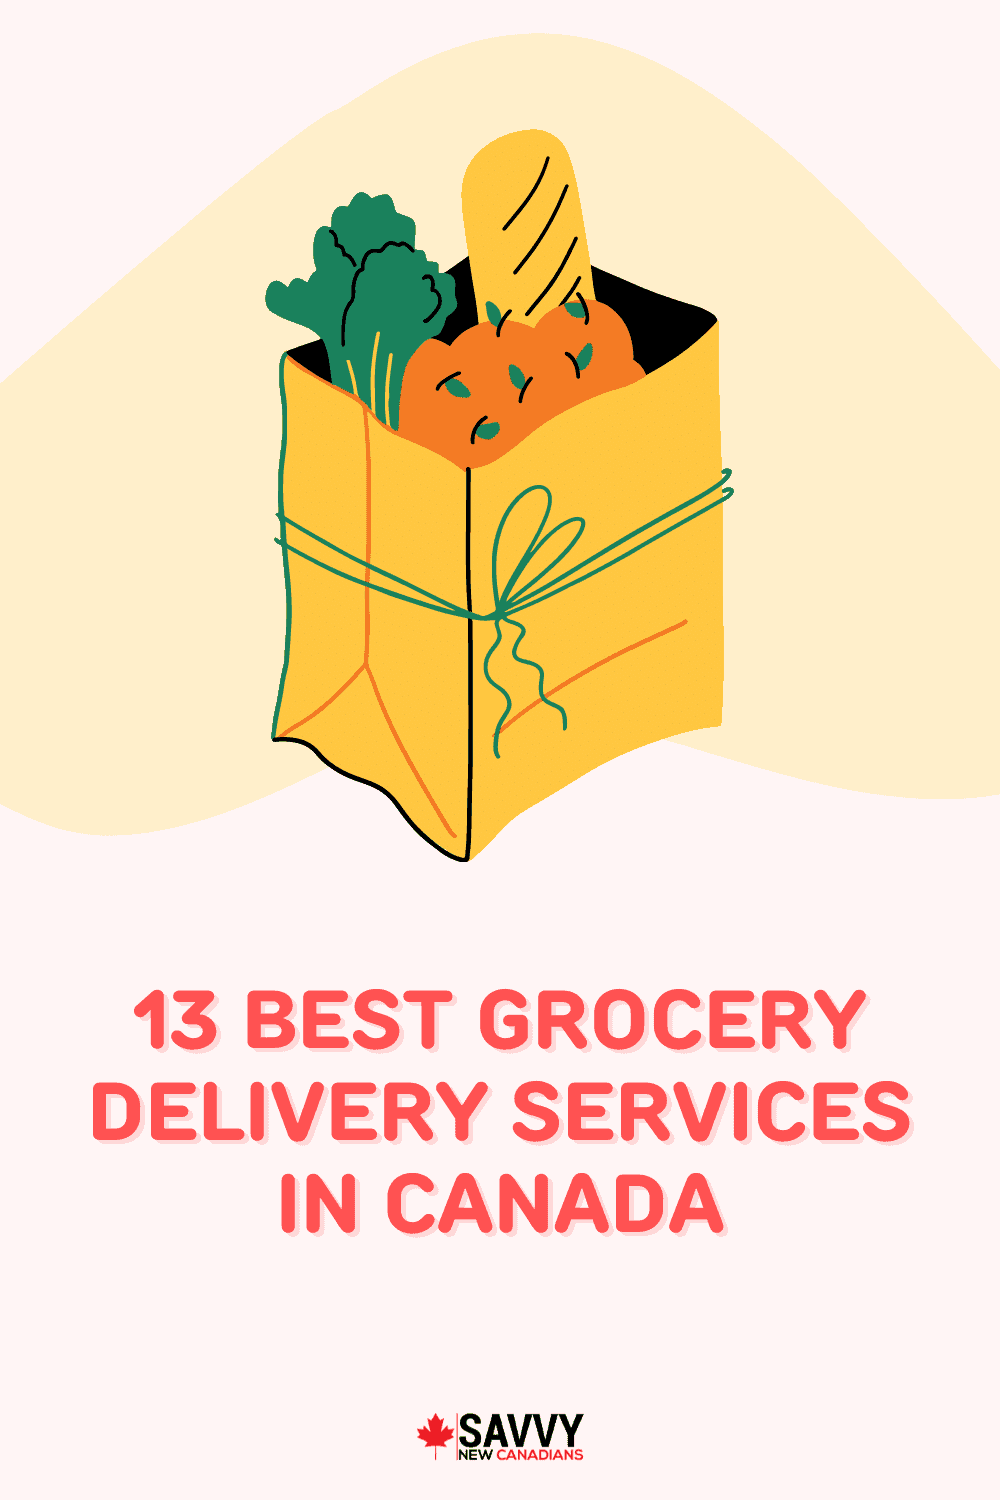 13 Best Grocery Delivery Services in Canada for 2022